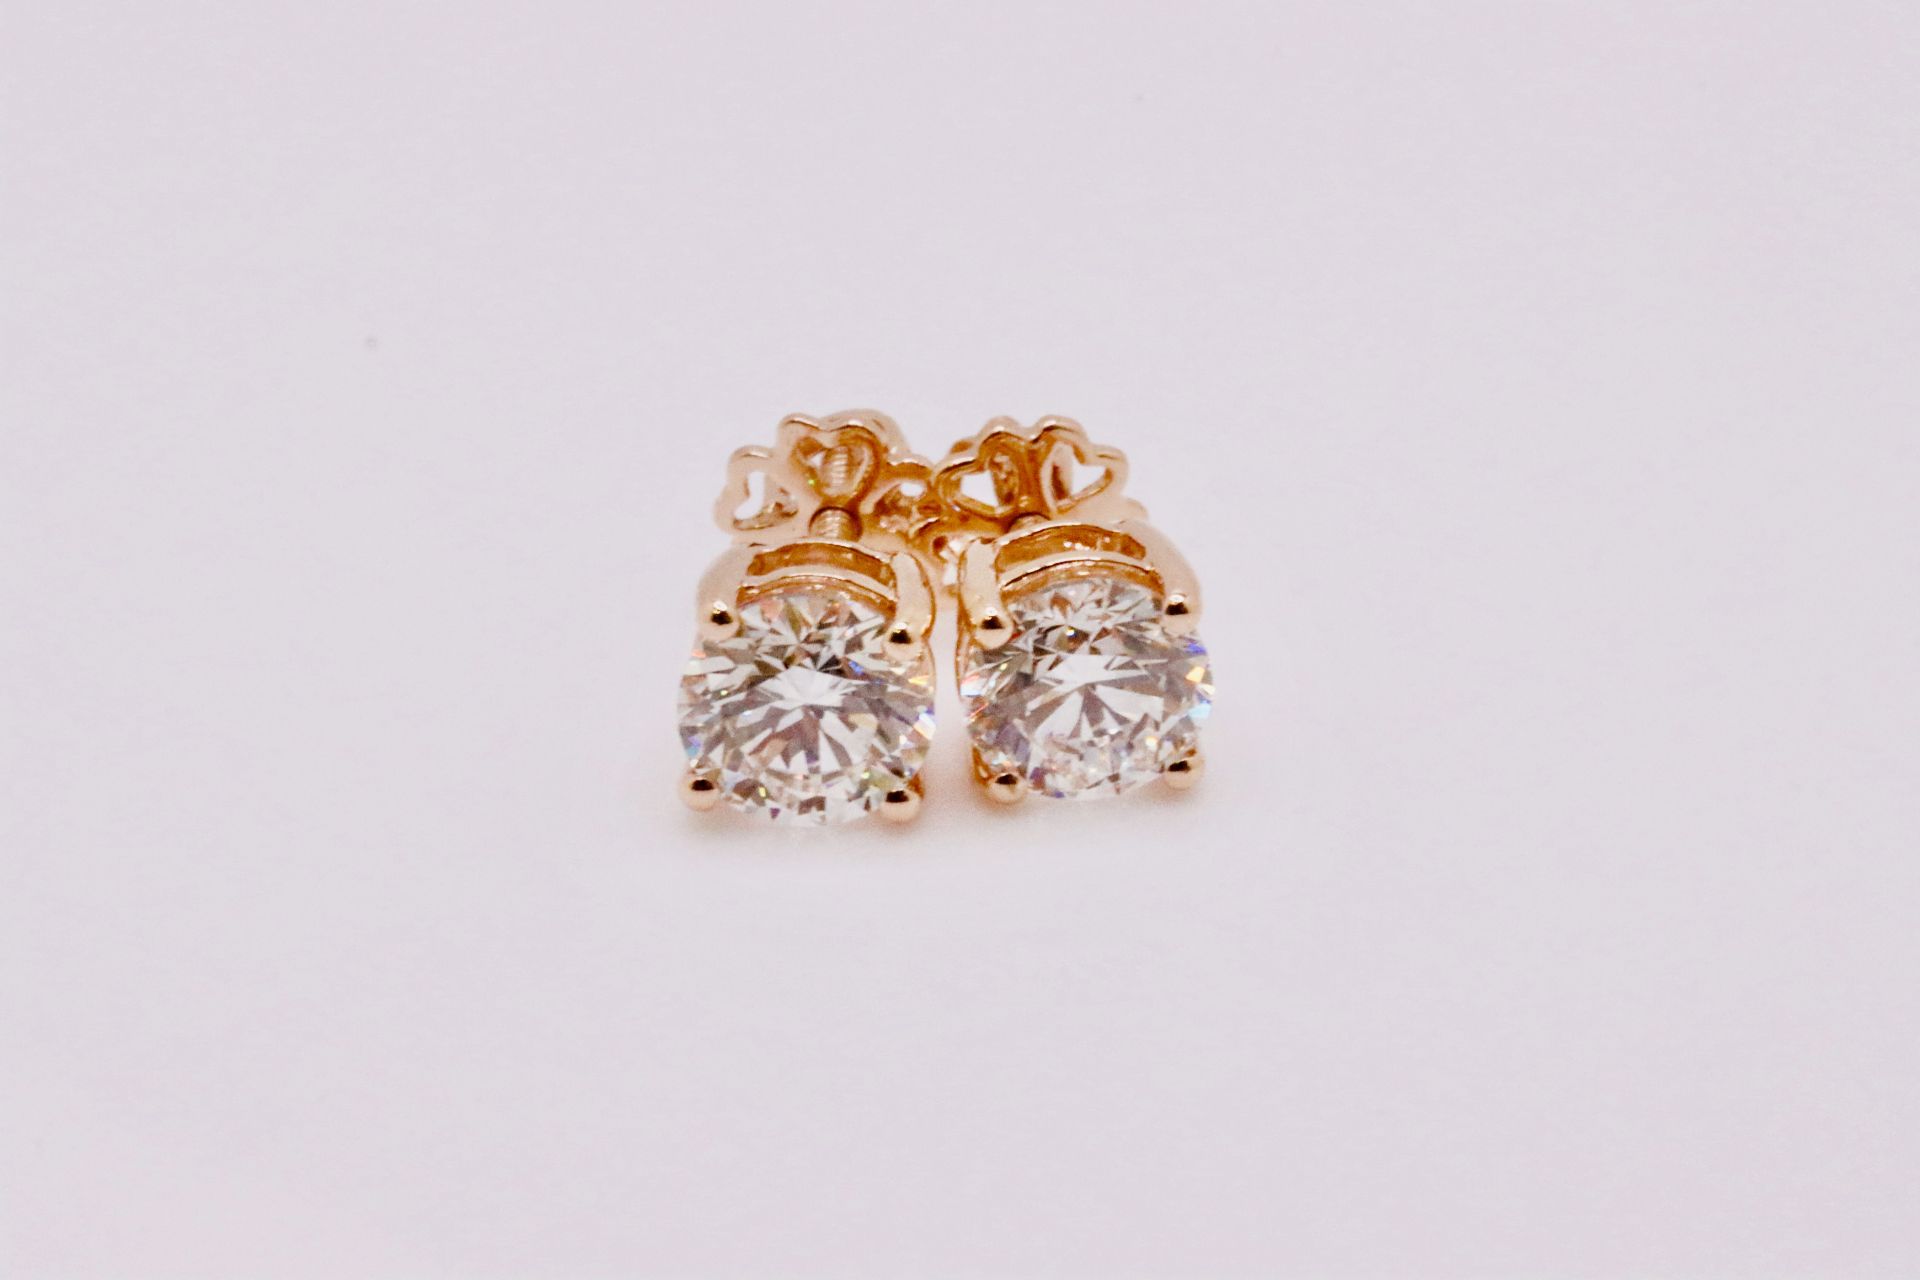 Round Brilliant Cut 4.00 Carat Diamond Earrings Set in 18kt Rose Gold - F Colour VS Clarity - GIA